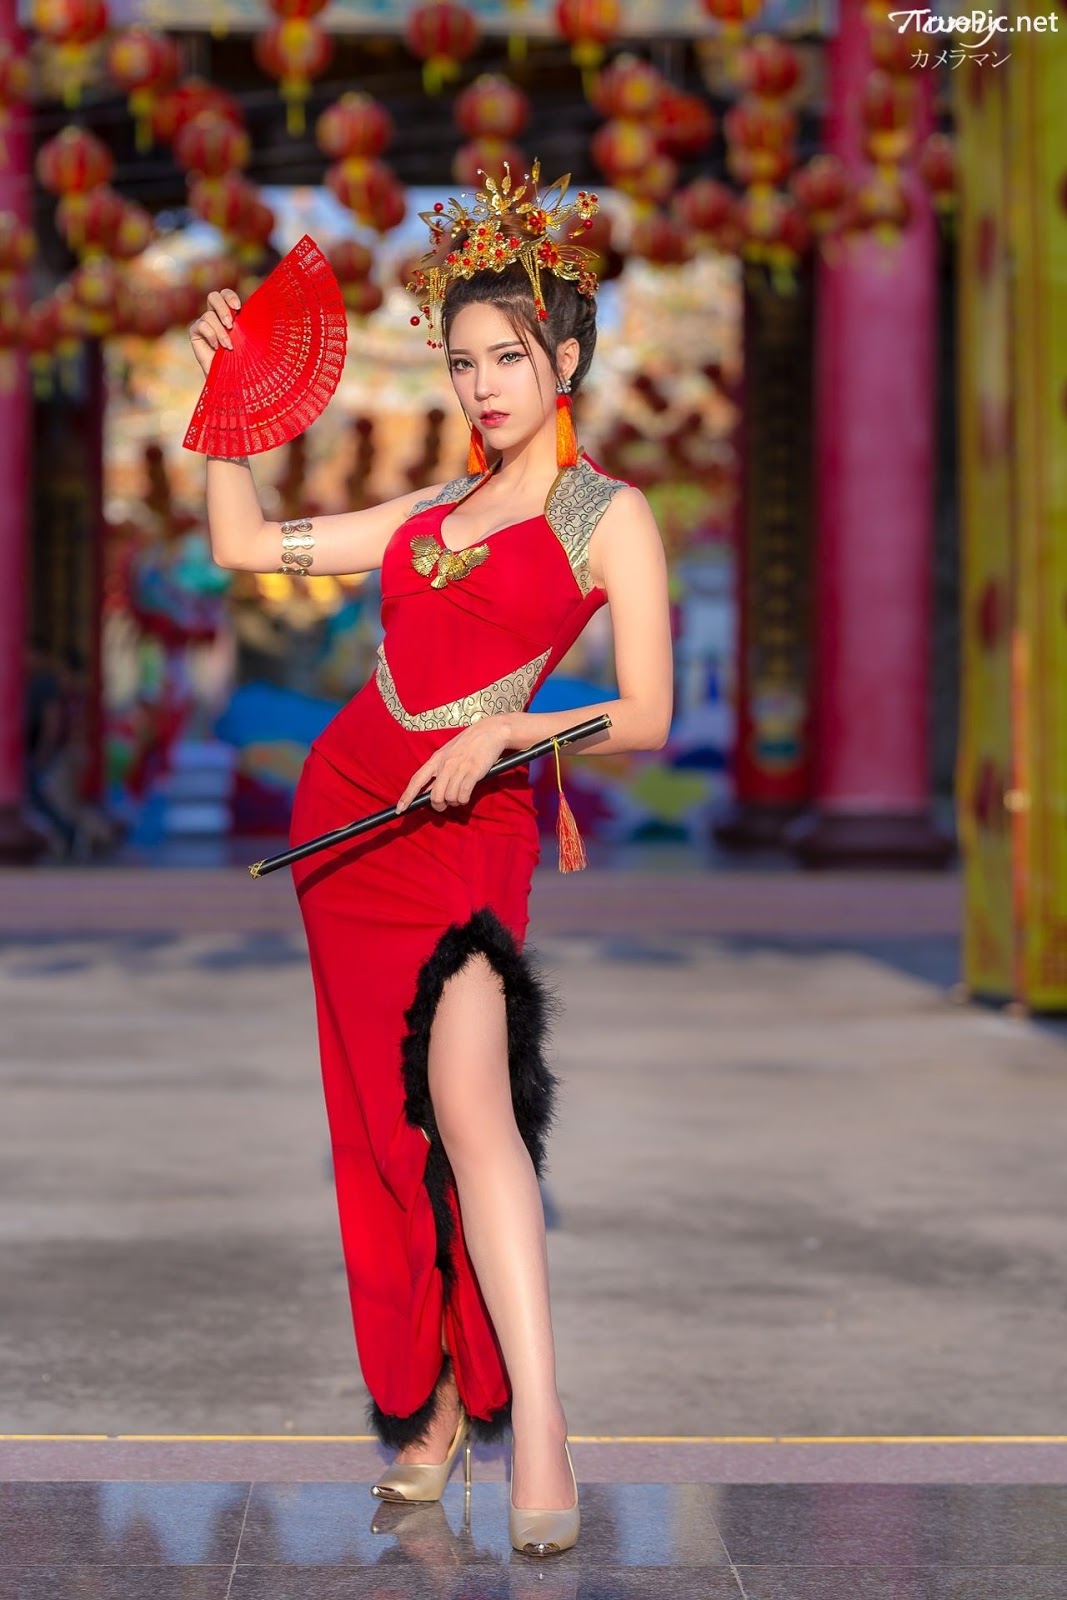 Image-Thailand-Hot-Model-Janet-Kanokwan-Saesim-Sexy-Chinese-Girl-Red-Dress-Traditional-TruePic.net- Picture-33